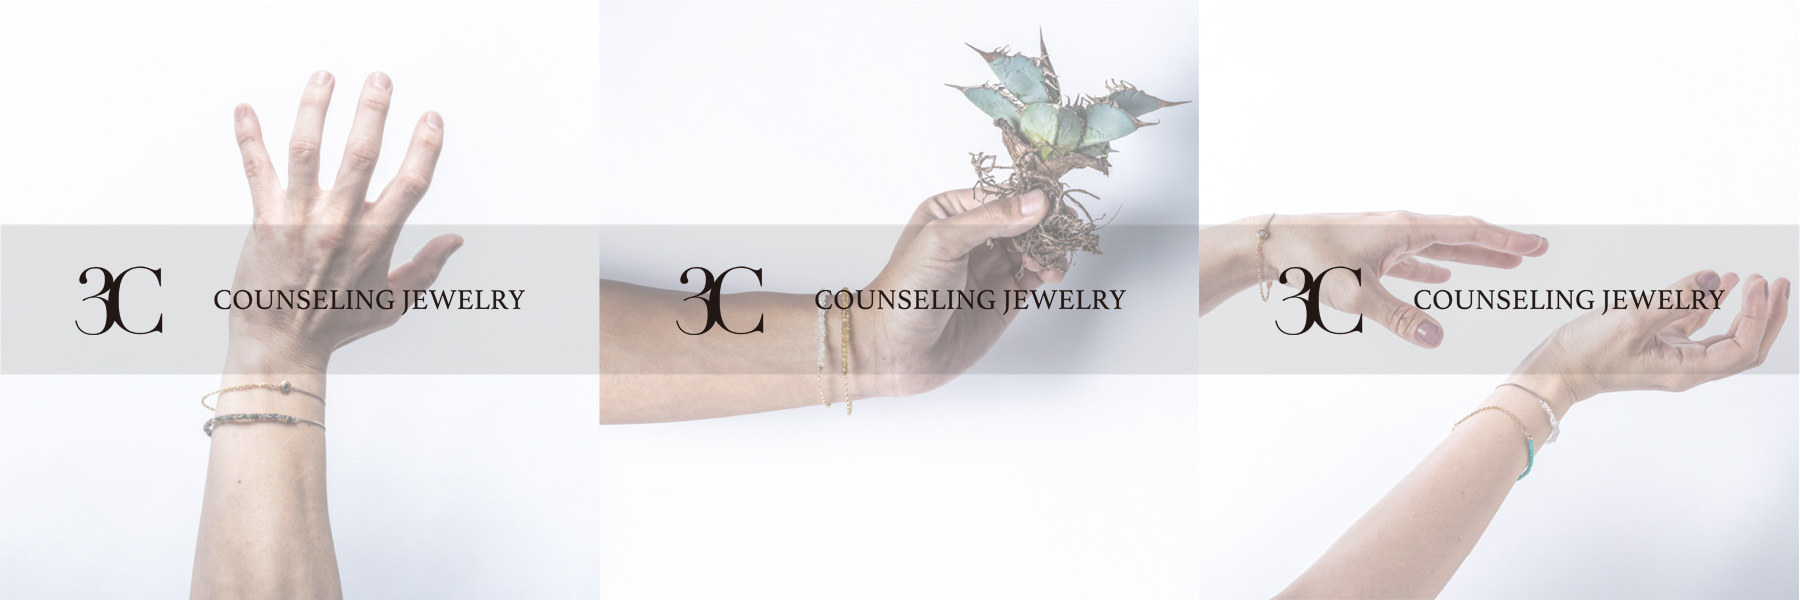 3C COUNSELING JEWELRY